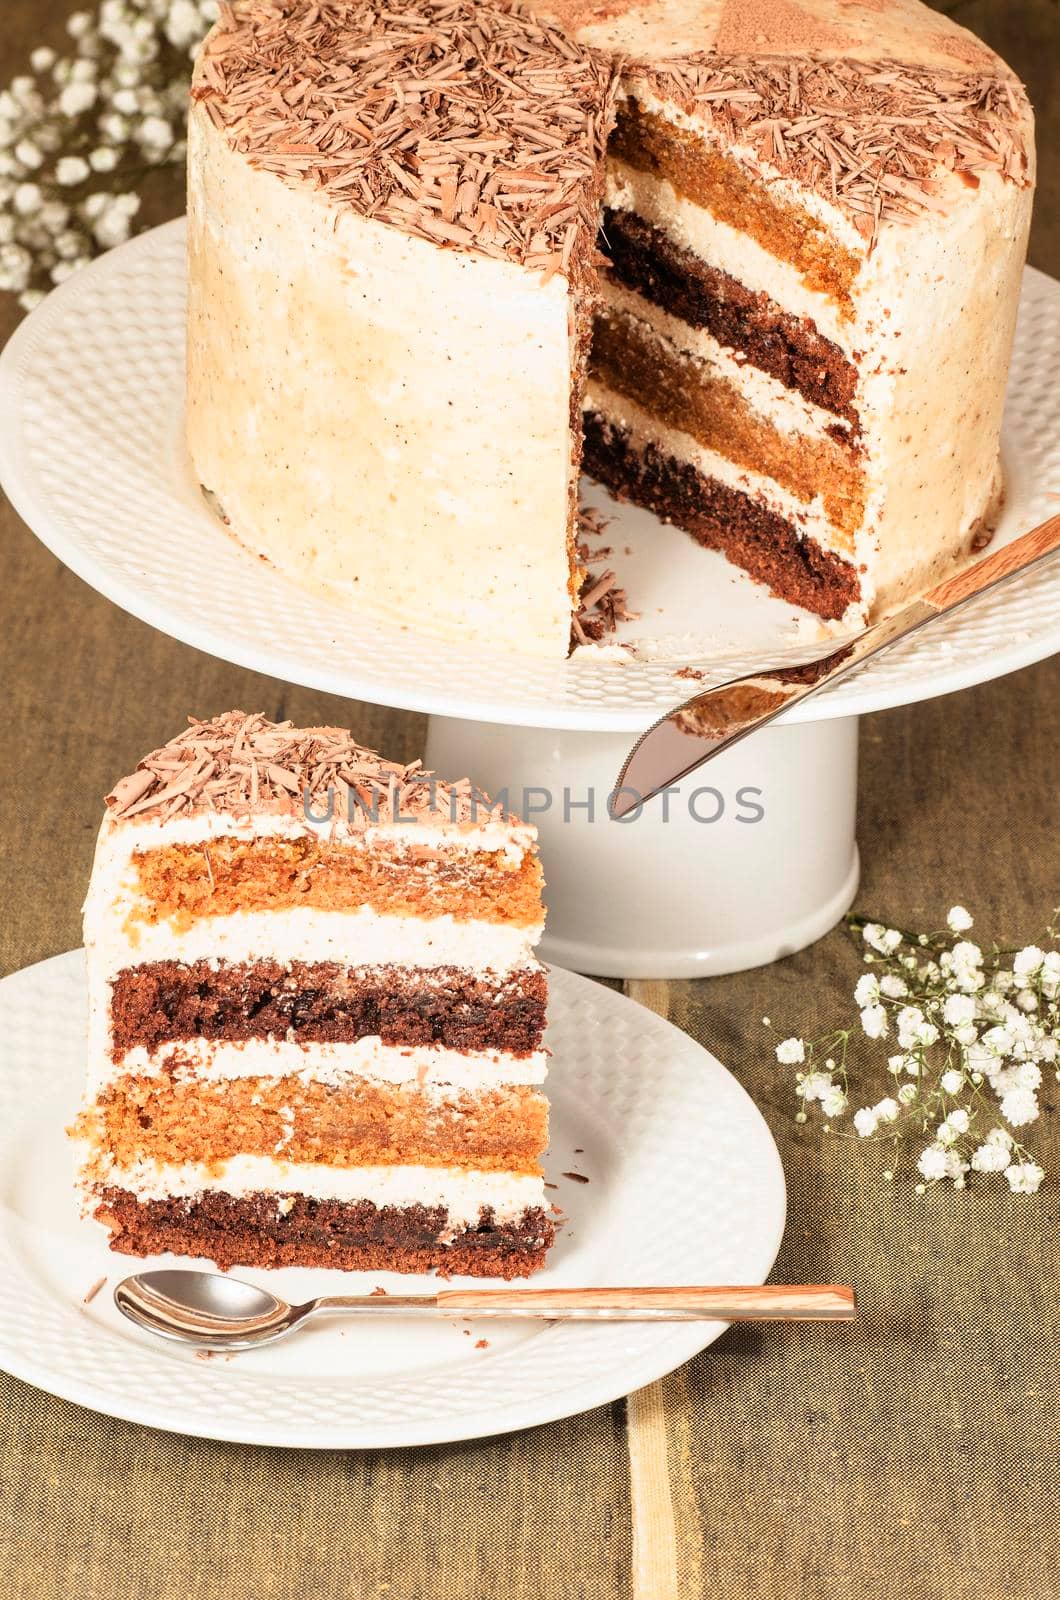 Chocolate pumpkin cake with spiced brown butter frosting for Valentine's Day. From series Pumpkin season